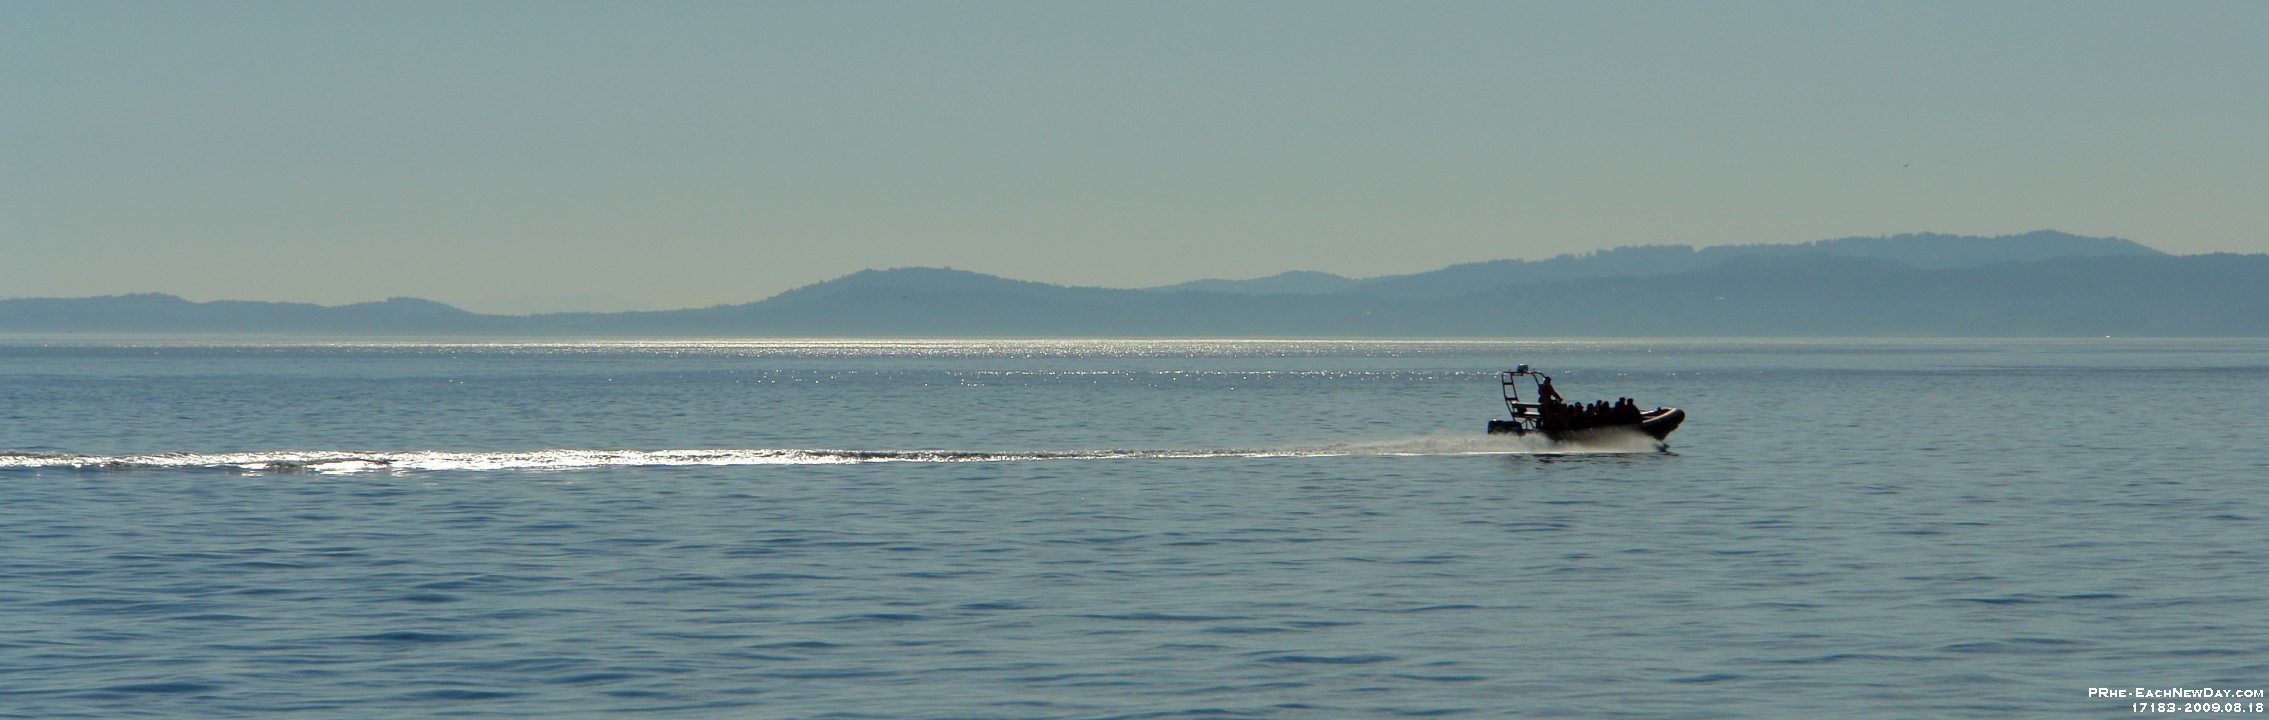 17183CrLe - Whale watching, Victoria